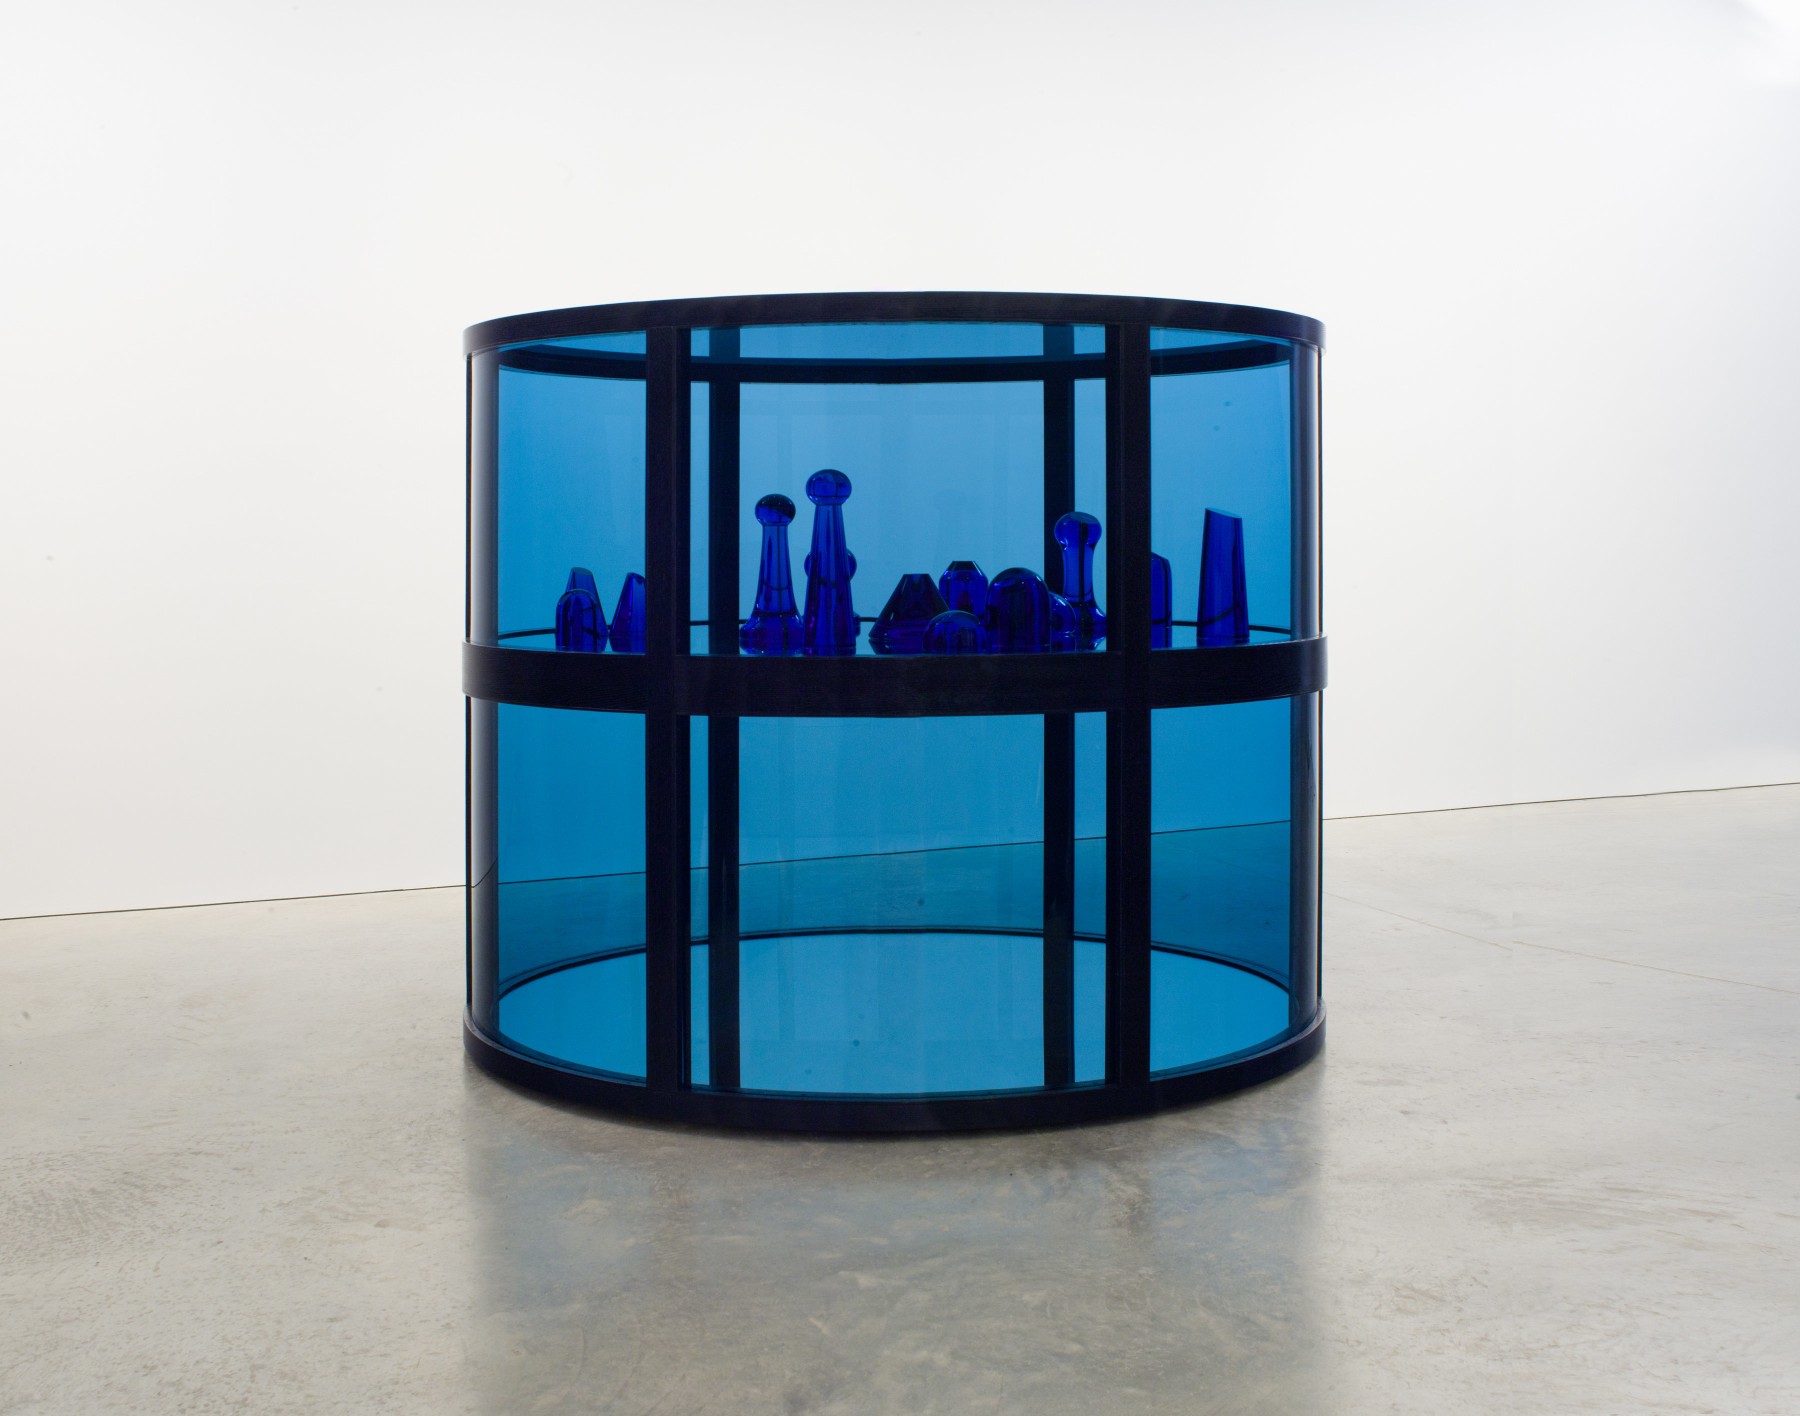 Cylindrical blue glass structure with blue glass sculptures inside